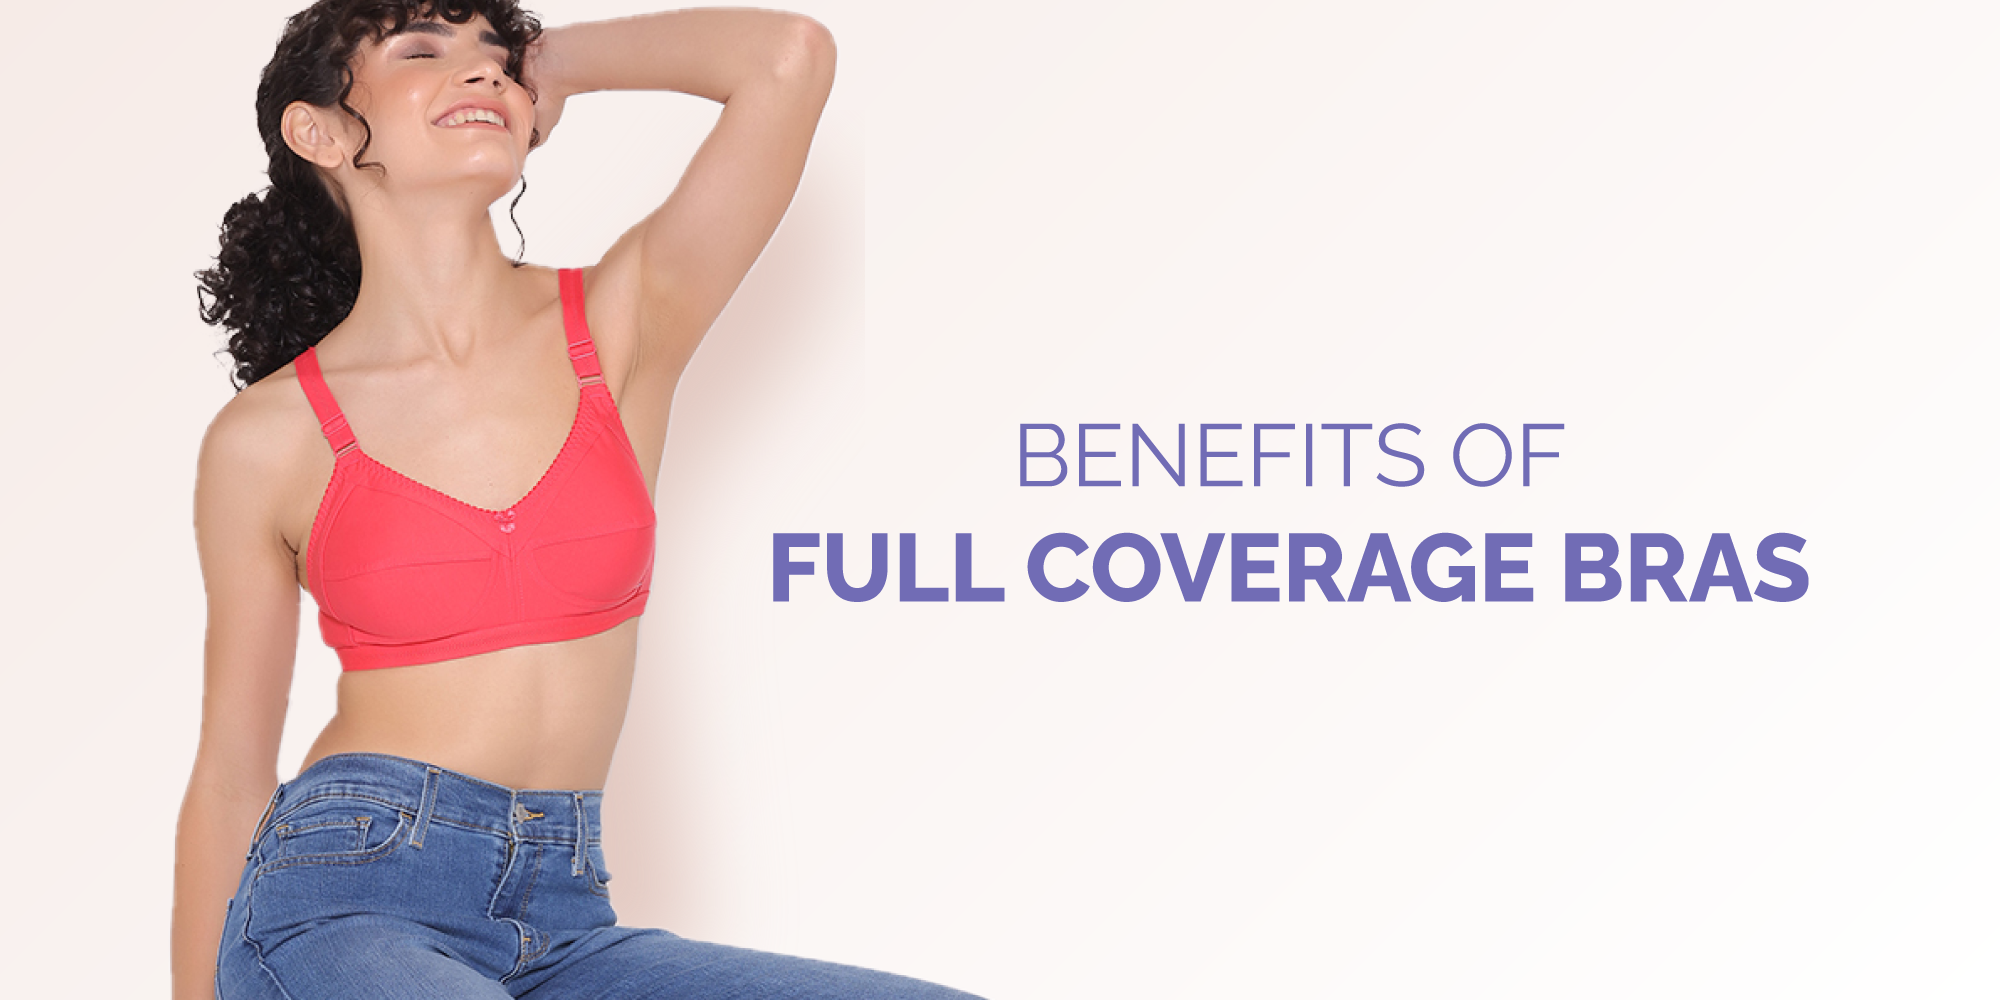 The Benefits of Good Support Bras, Large Bras